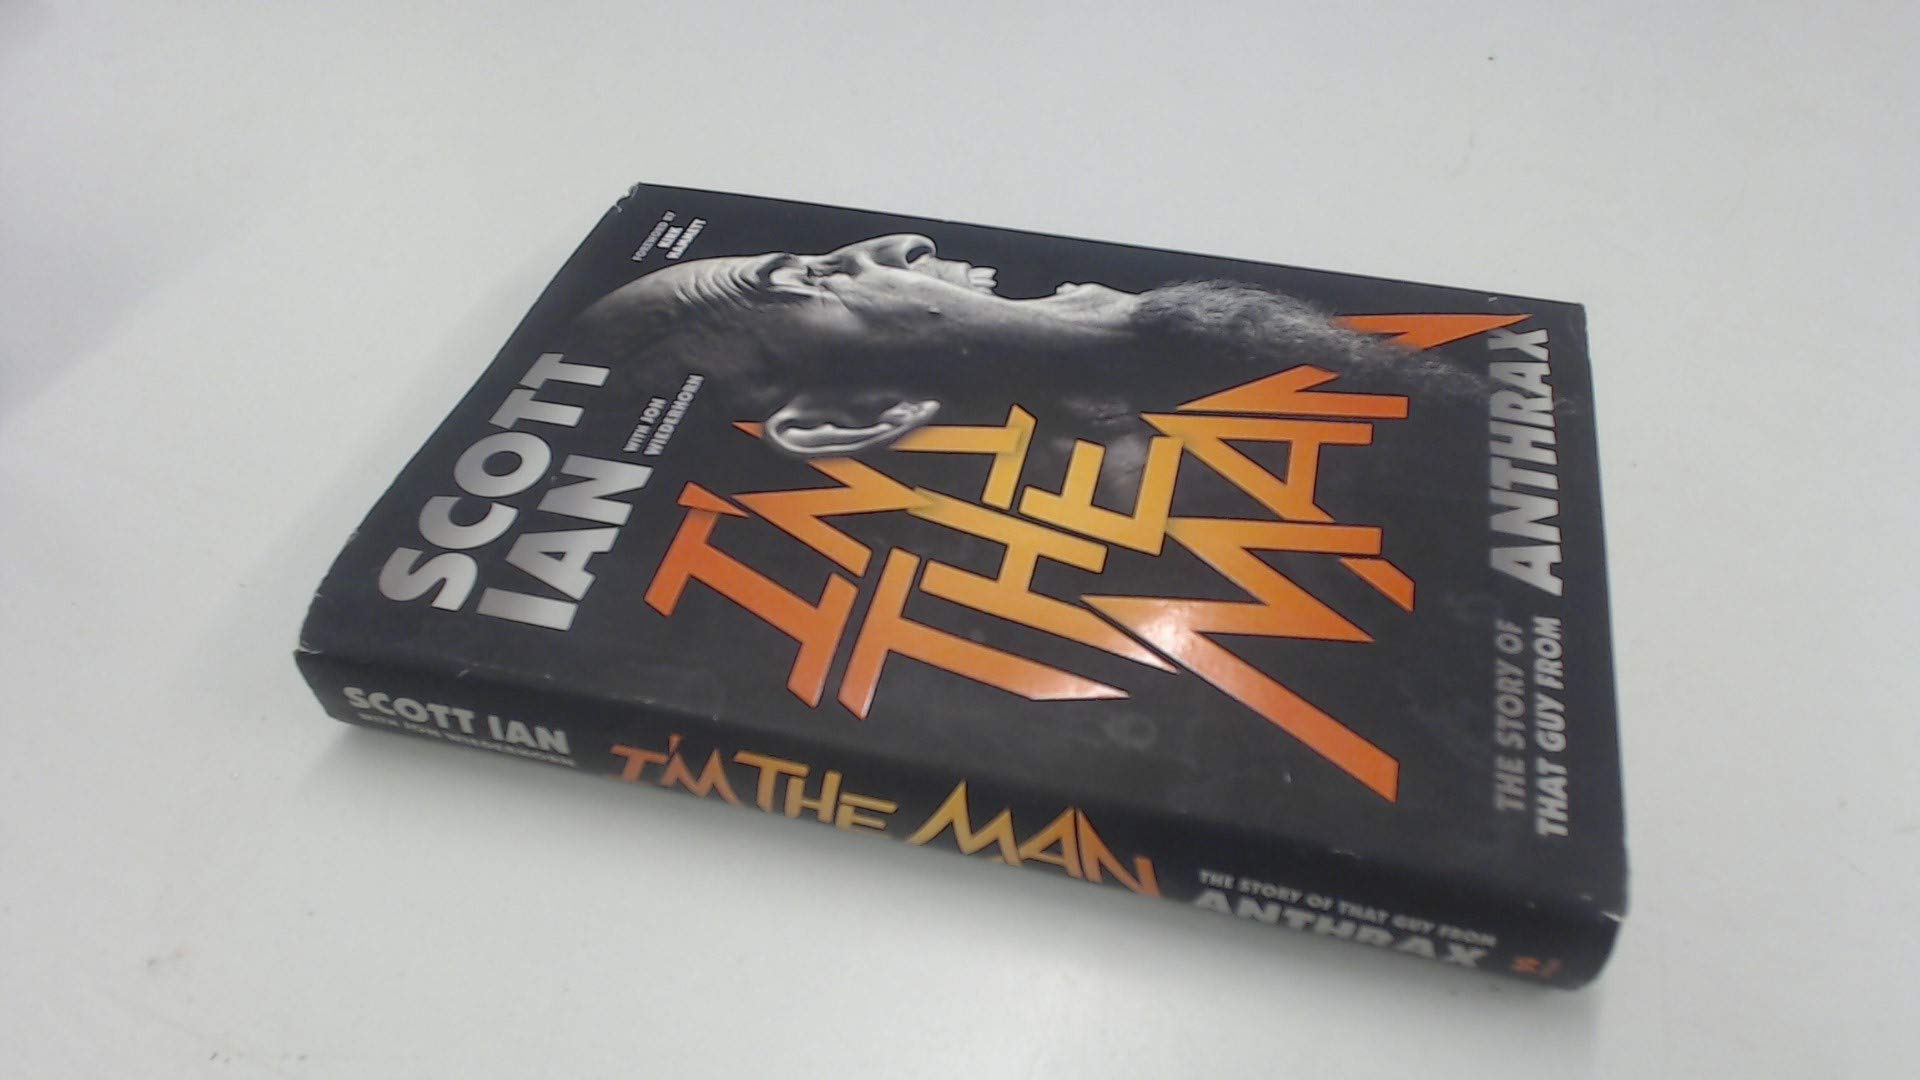 I'm the Man: The Story of That Guy from Anthrax - image 1 of 1